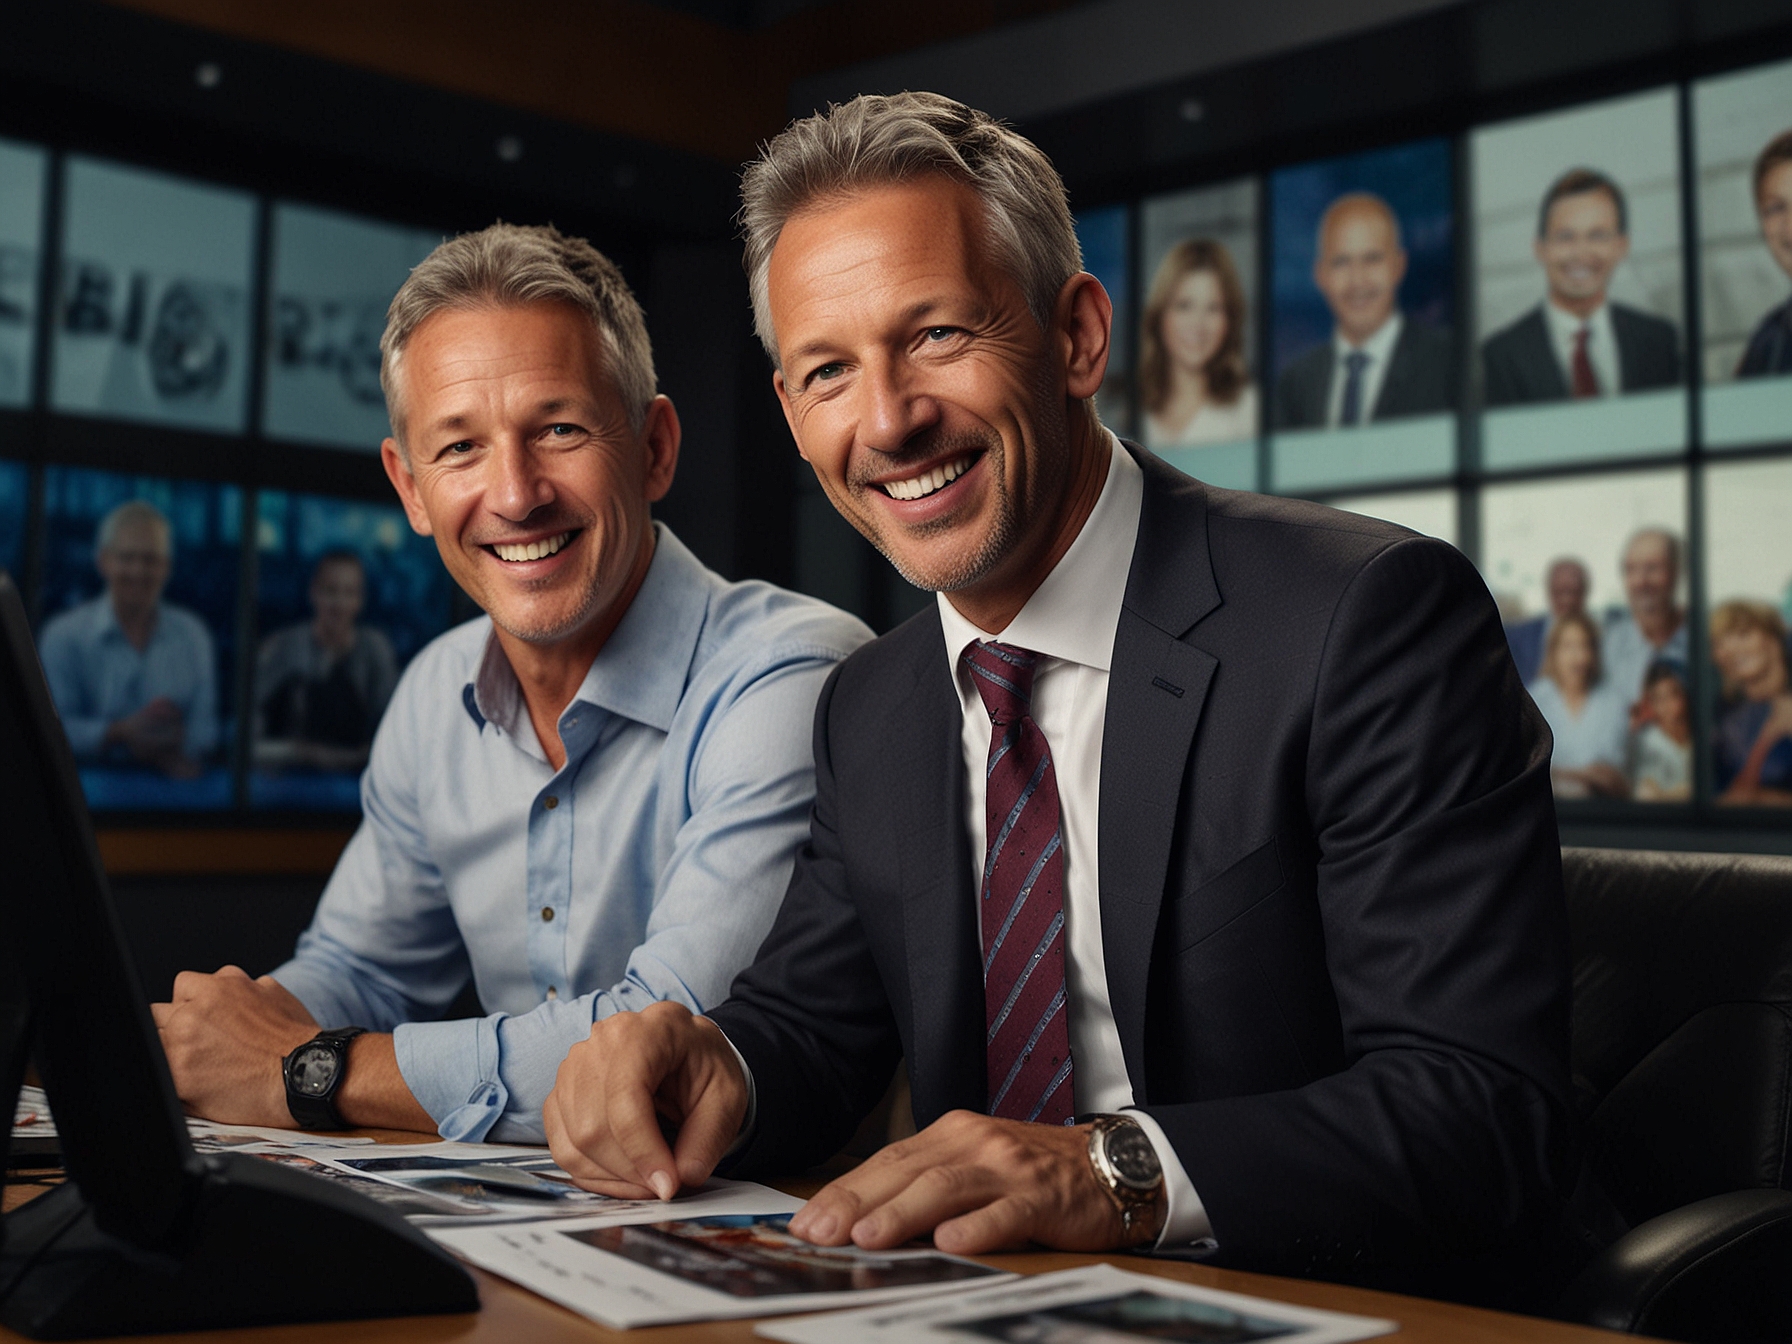 The BBC punditry team, including Gary Lineker and Alan Shearer, share a light-hearted moment during a live broadcast, aiming to connect with casual viewers and younger audiences.